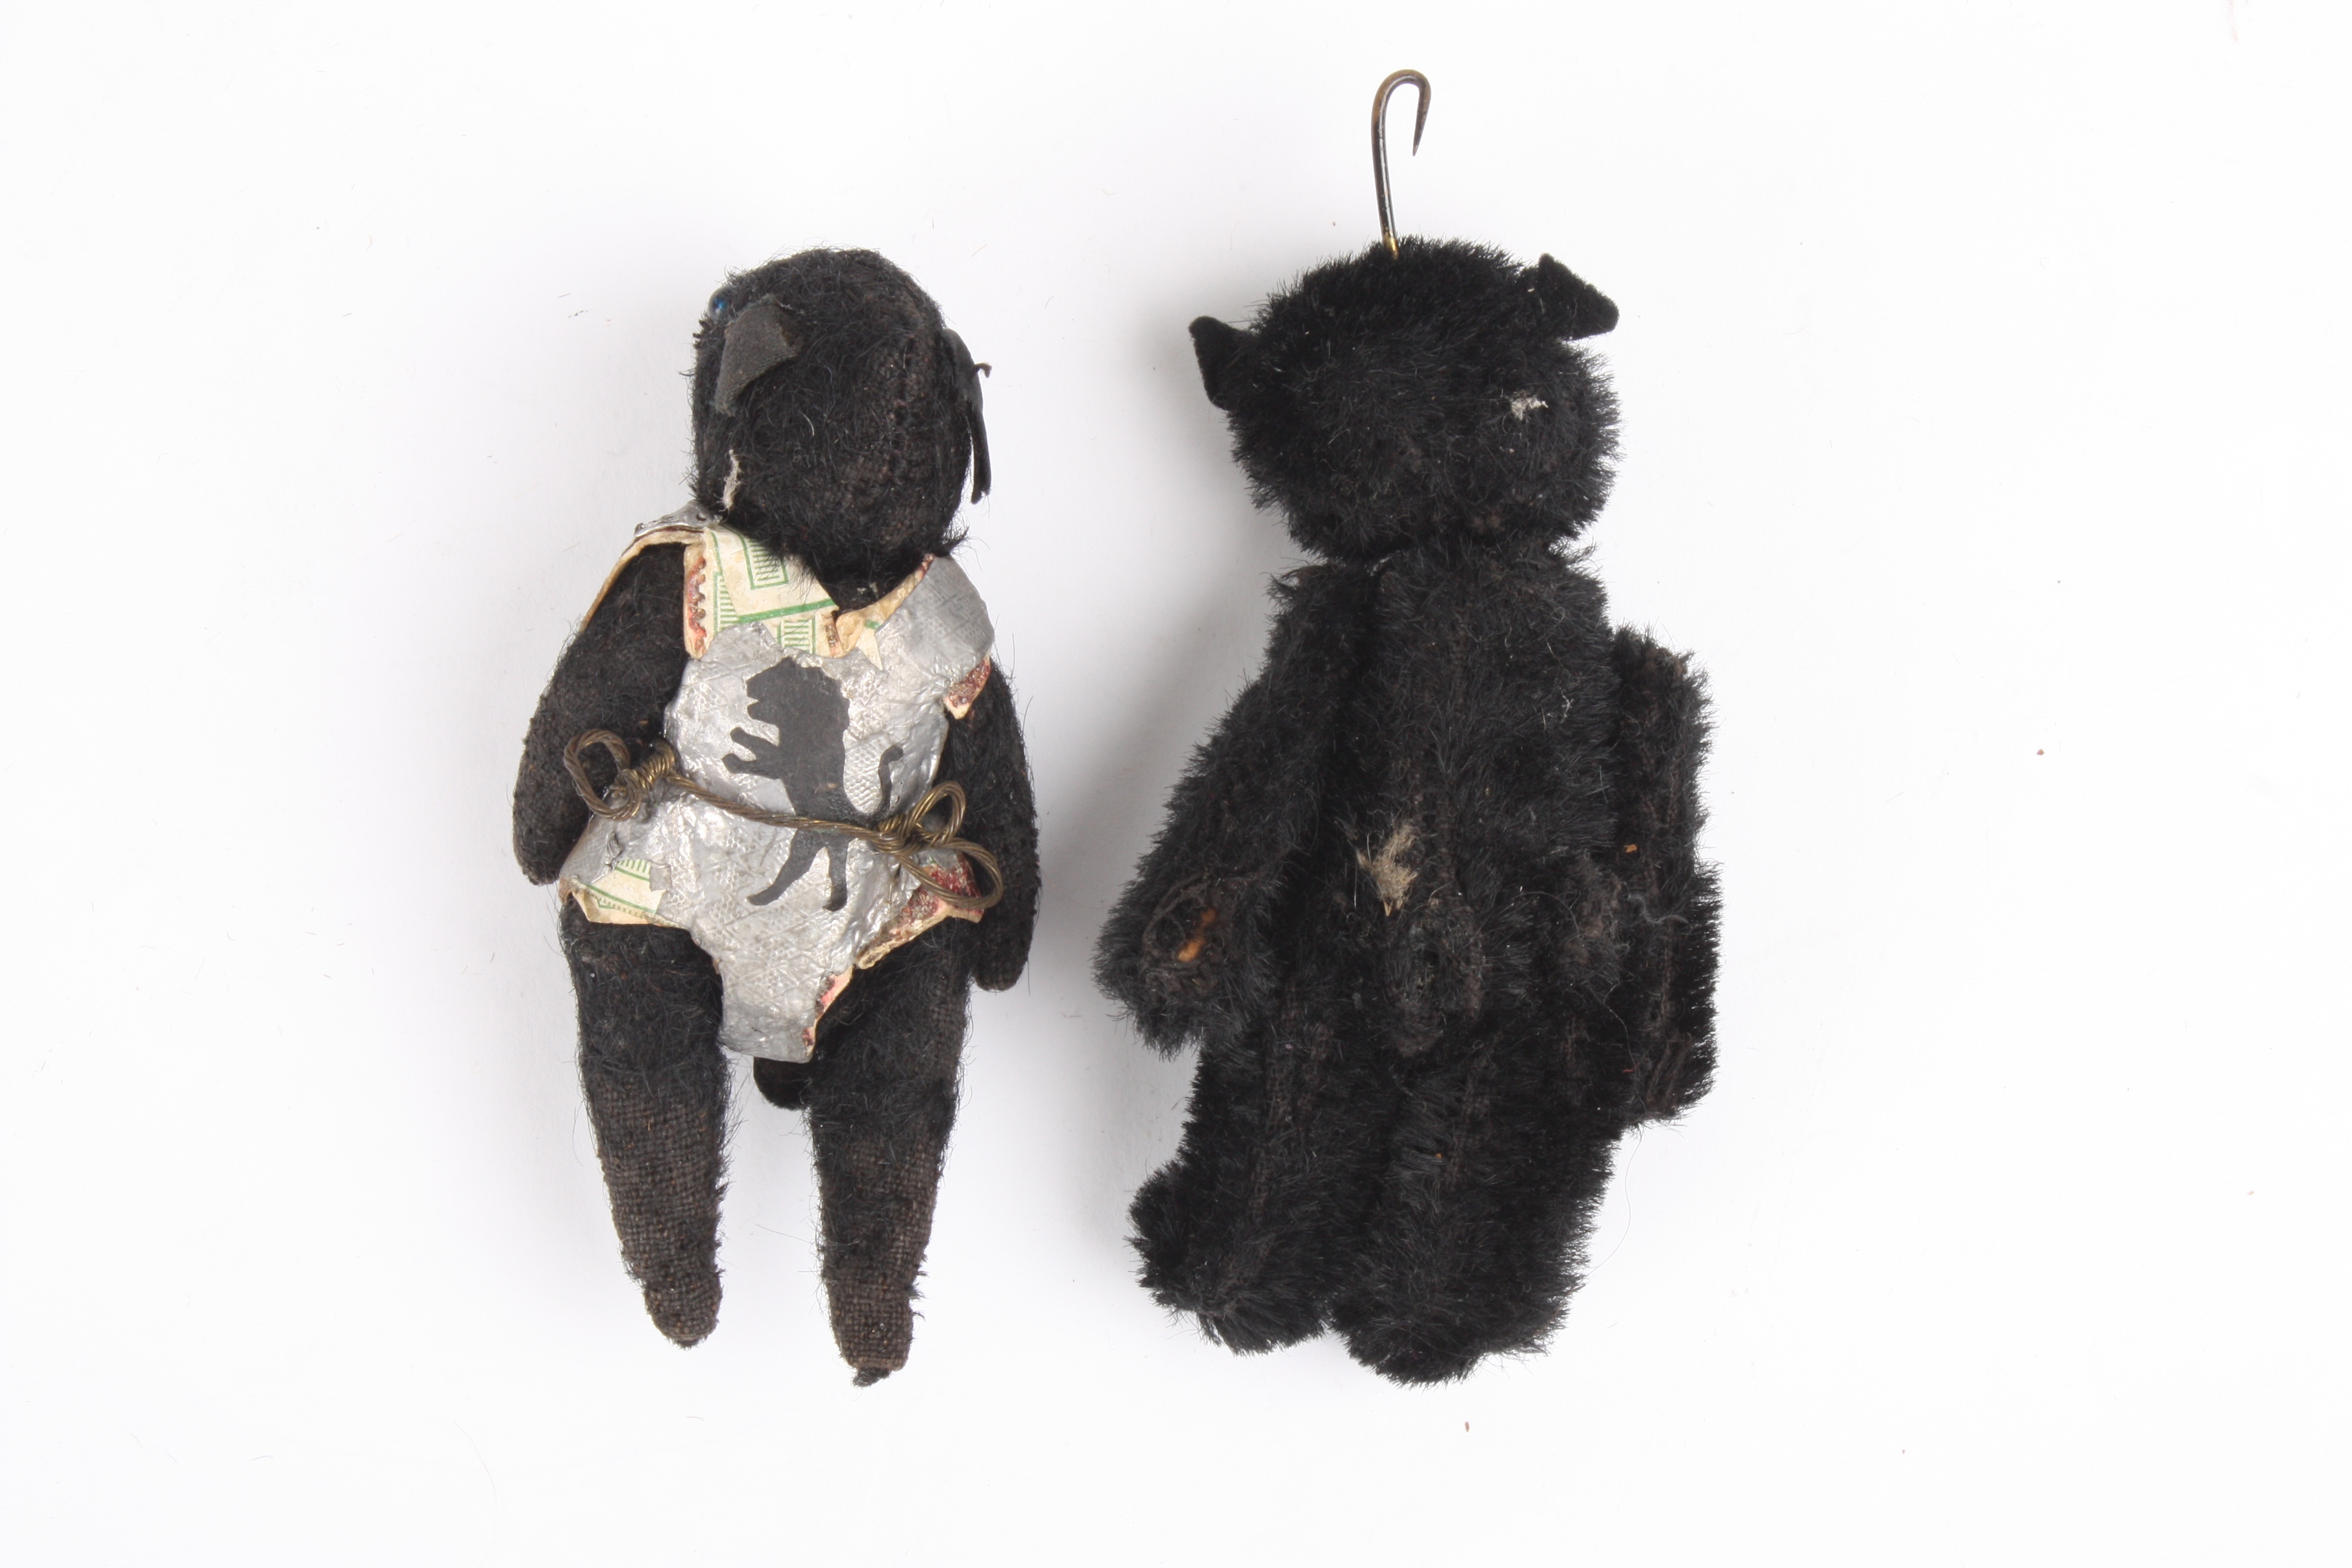 Two Schuco toy bears
both with articulated head, arms and legs.Dimensions: 9.5 and 9 cm long. - Image 2 of 2